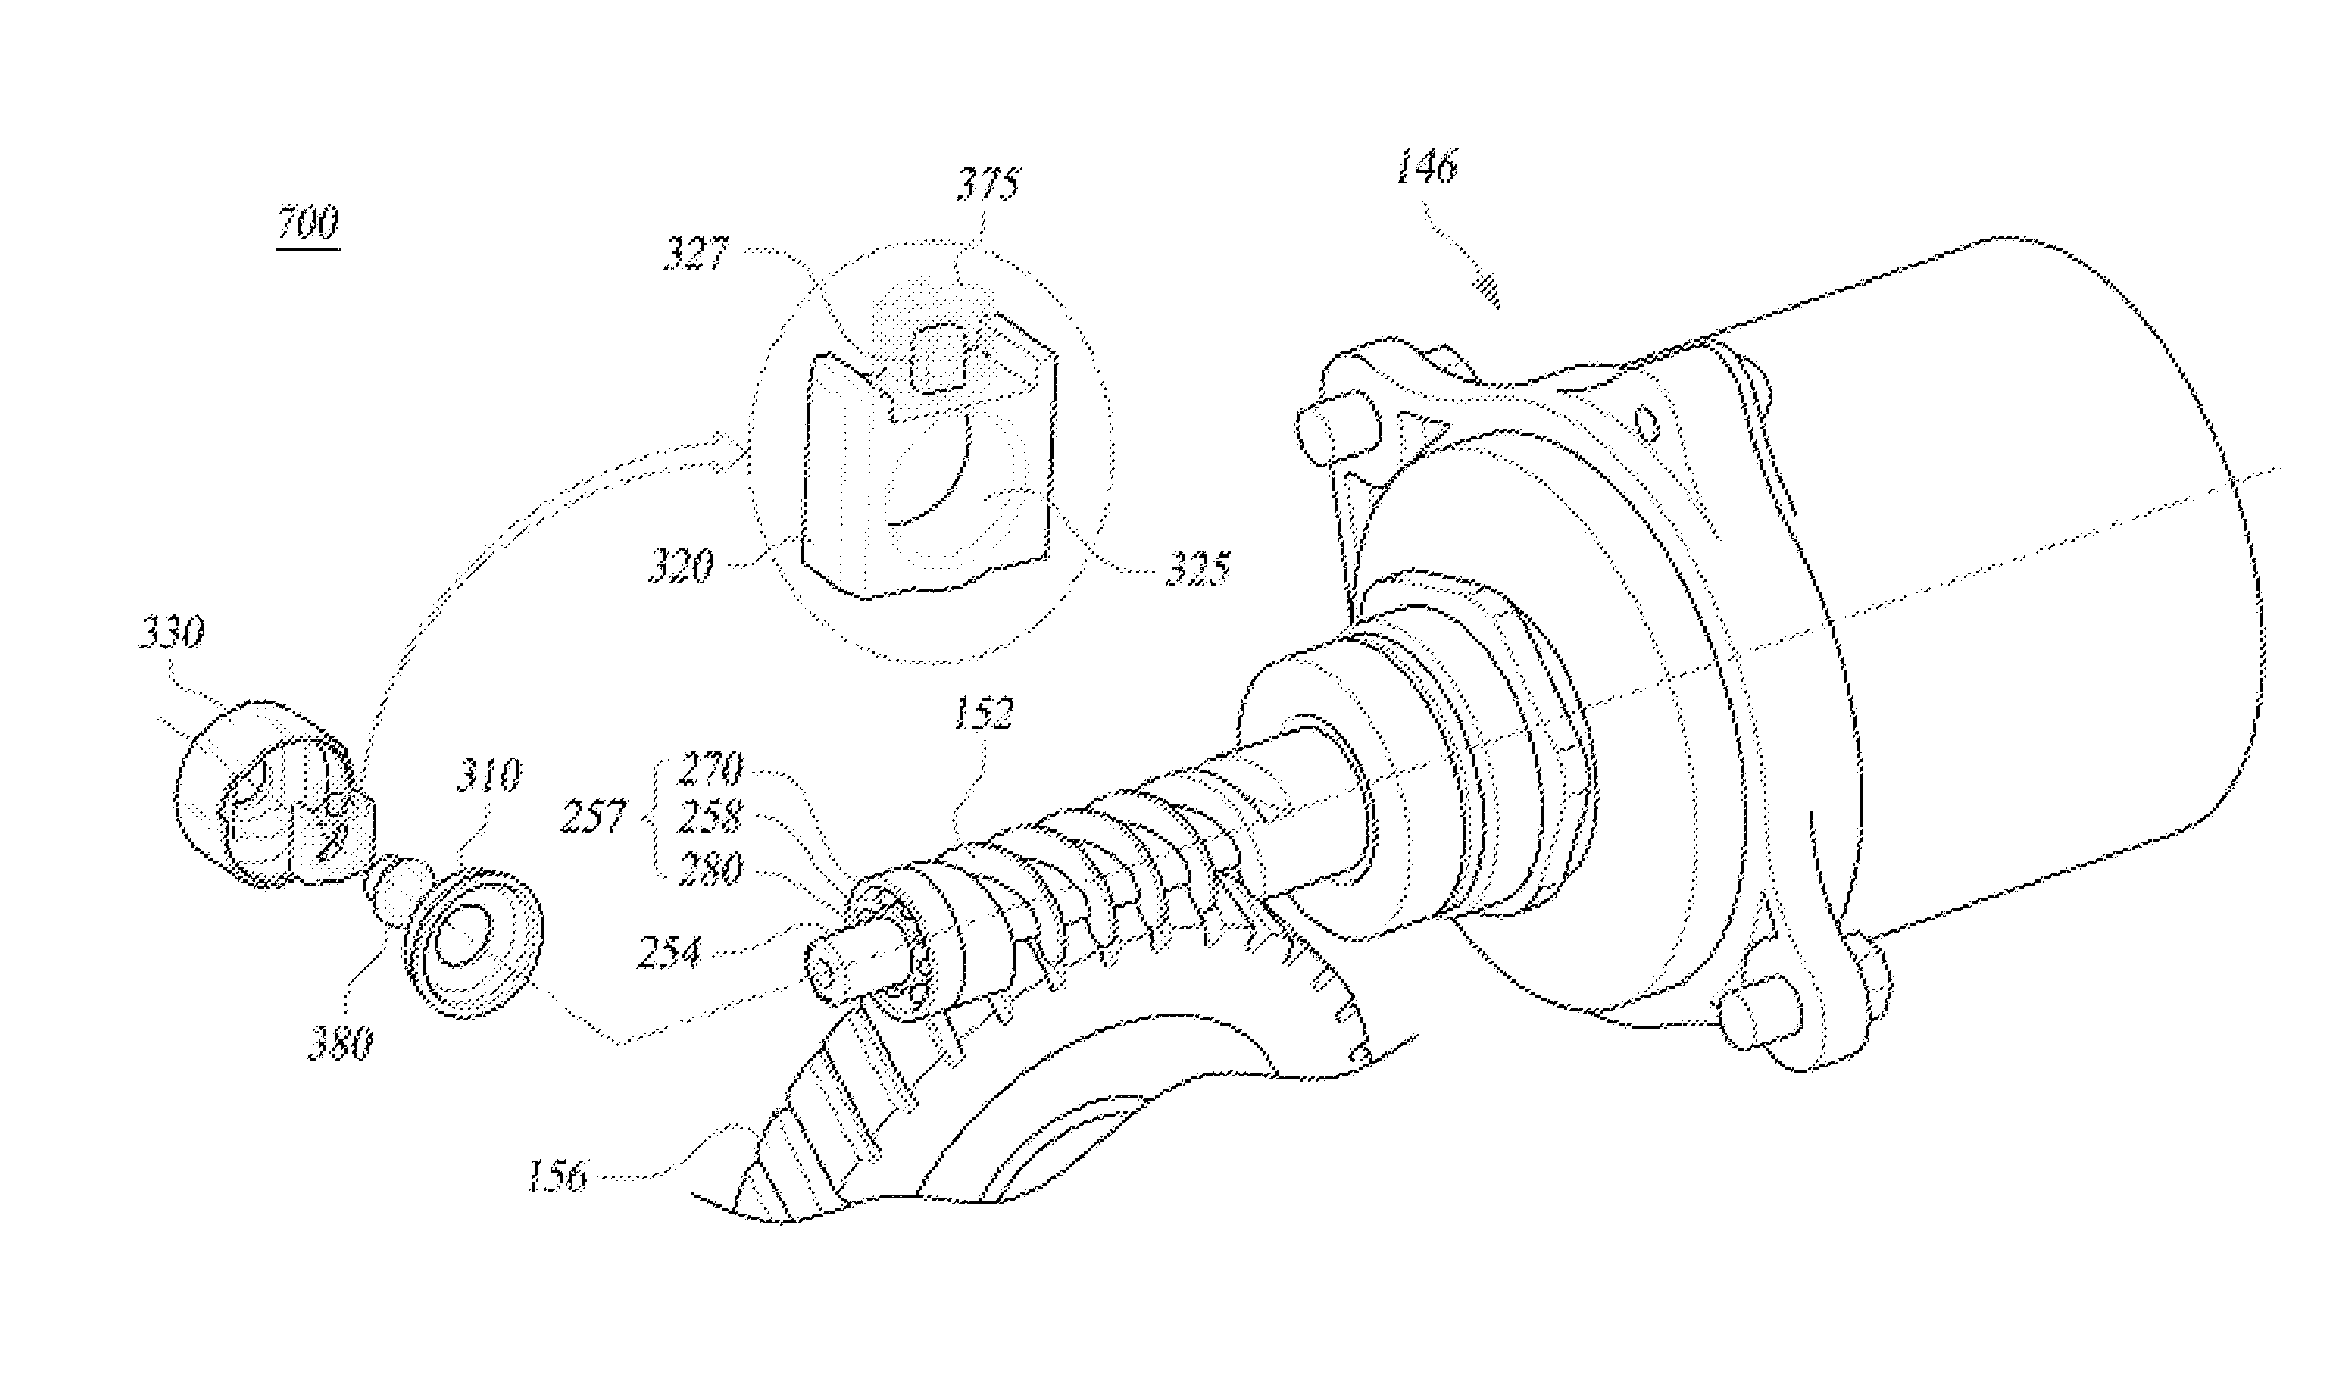 Reducer of electronic power steering apparatus backgound of the invention